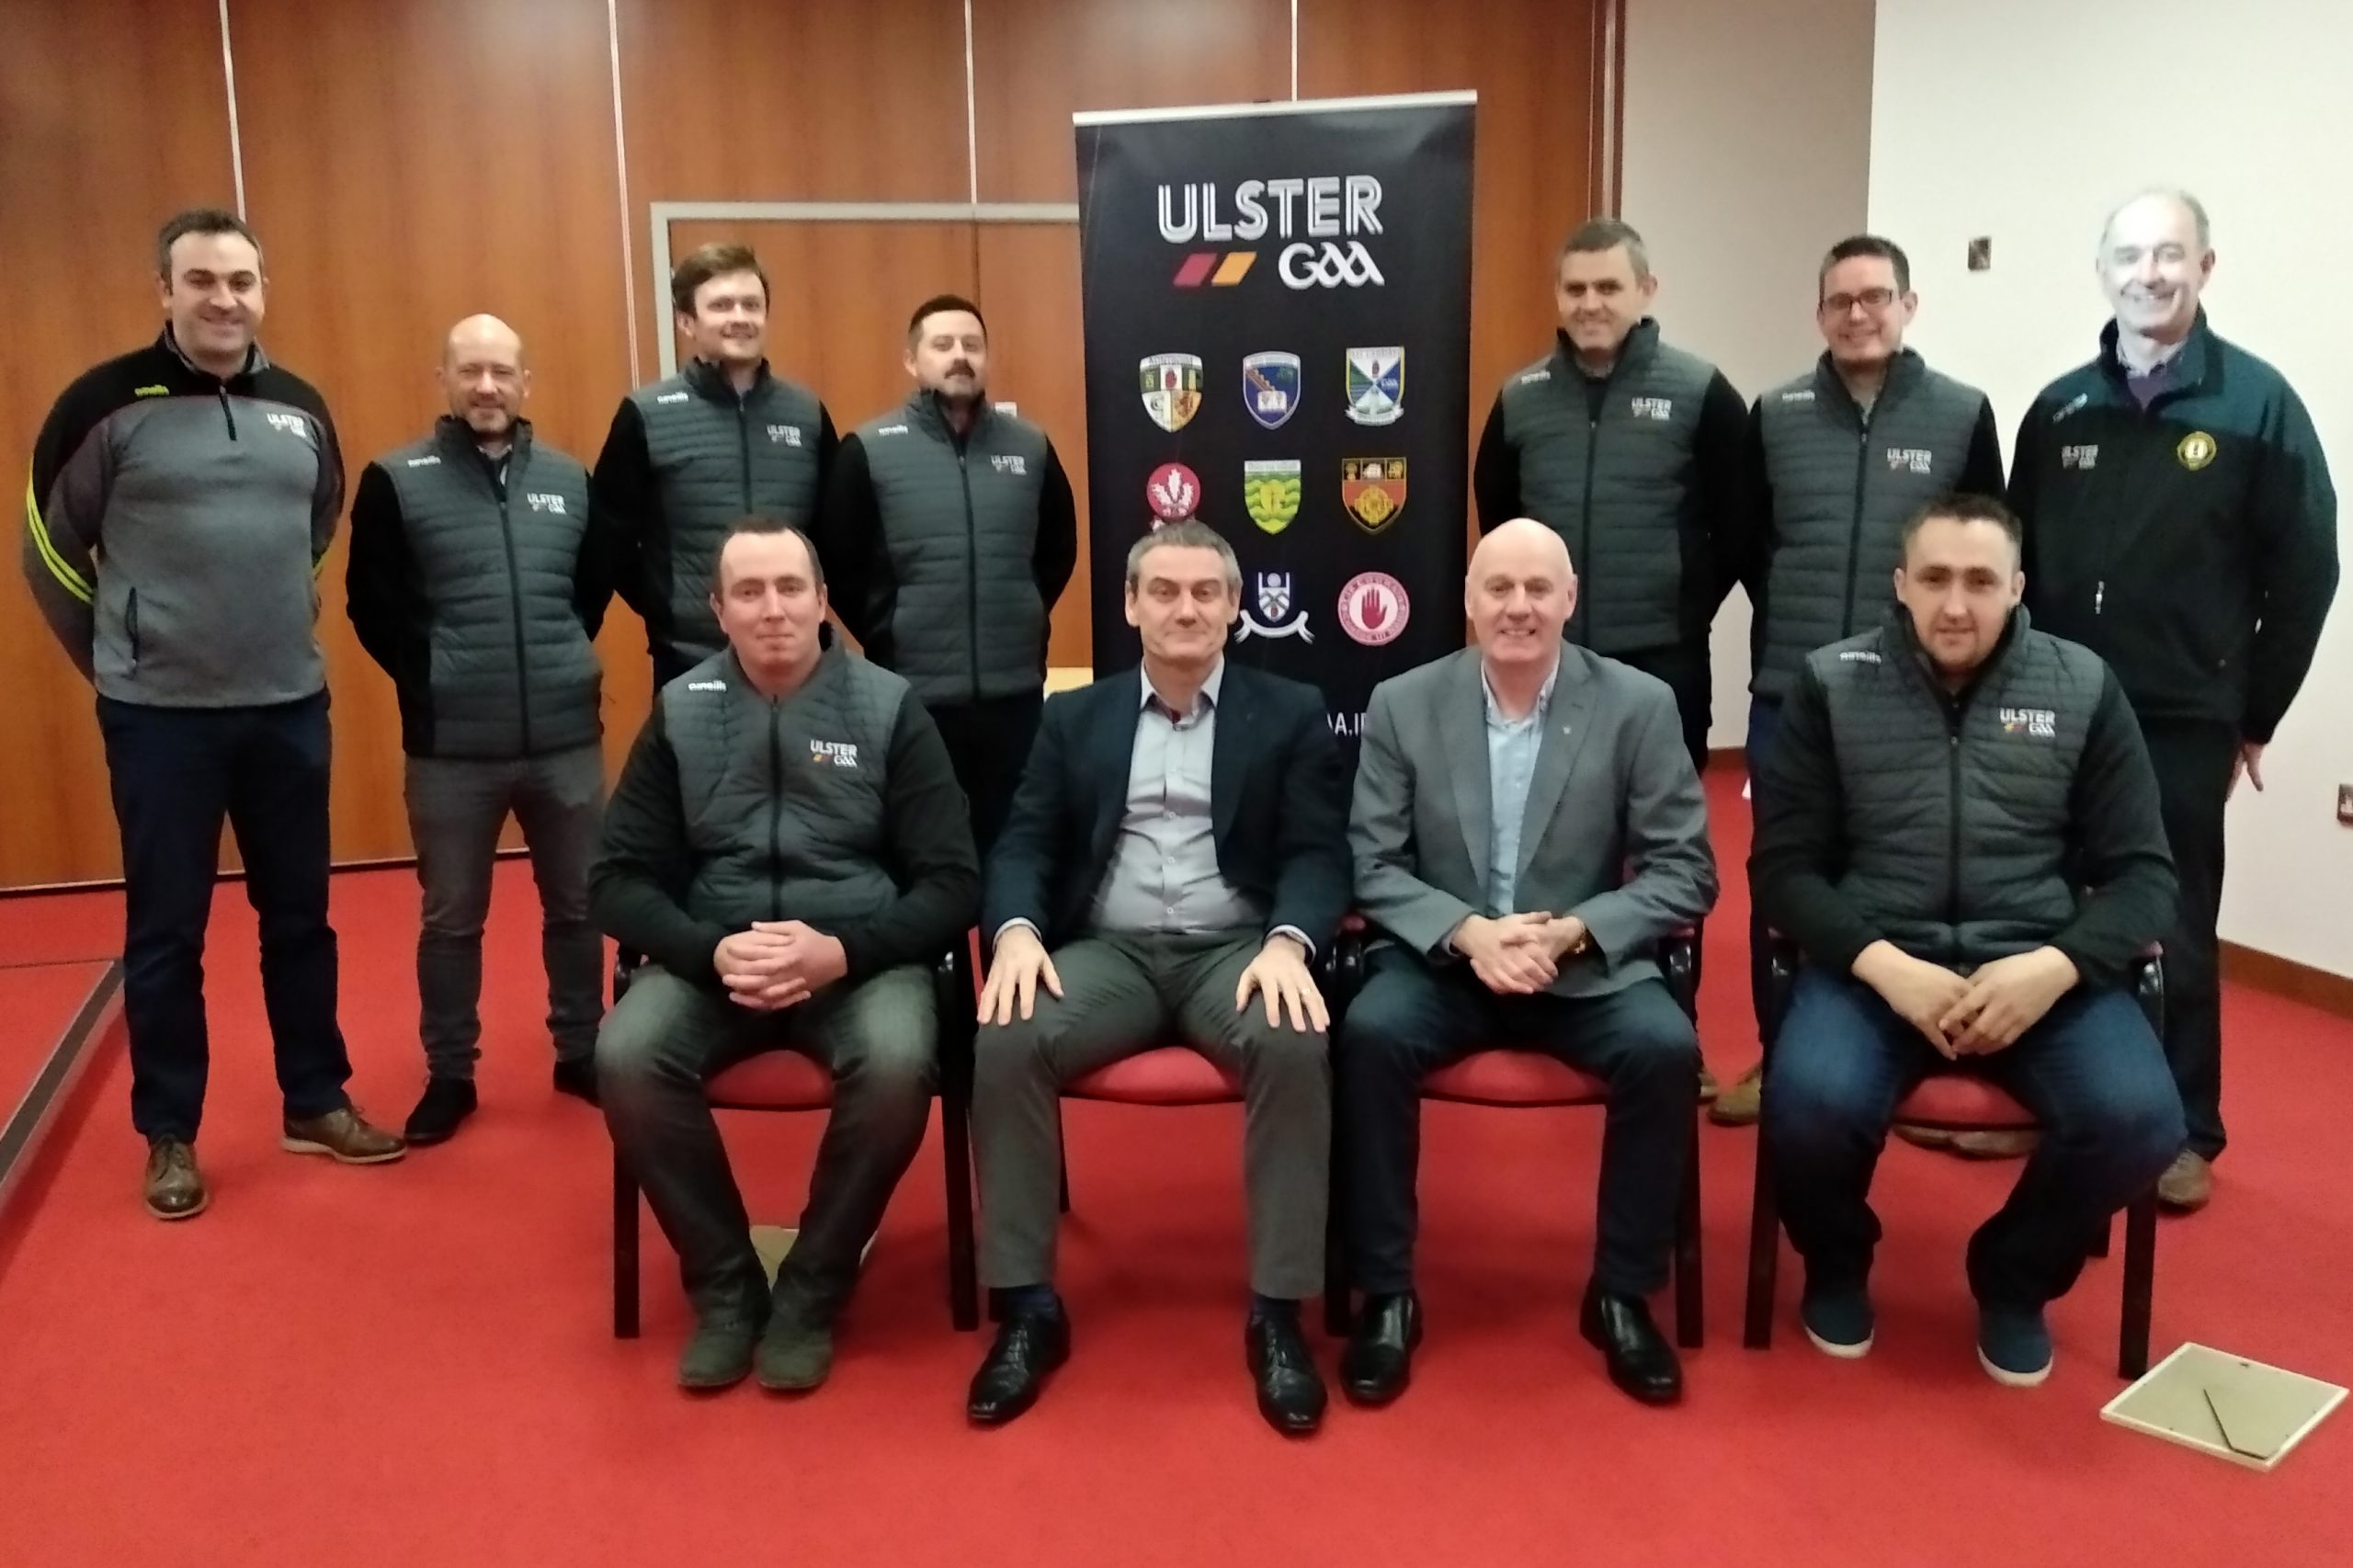 Seven referees graduate from Ulster GAA Referee Academy